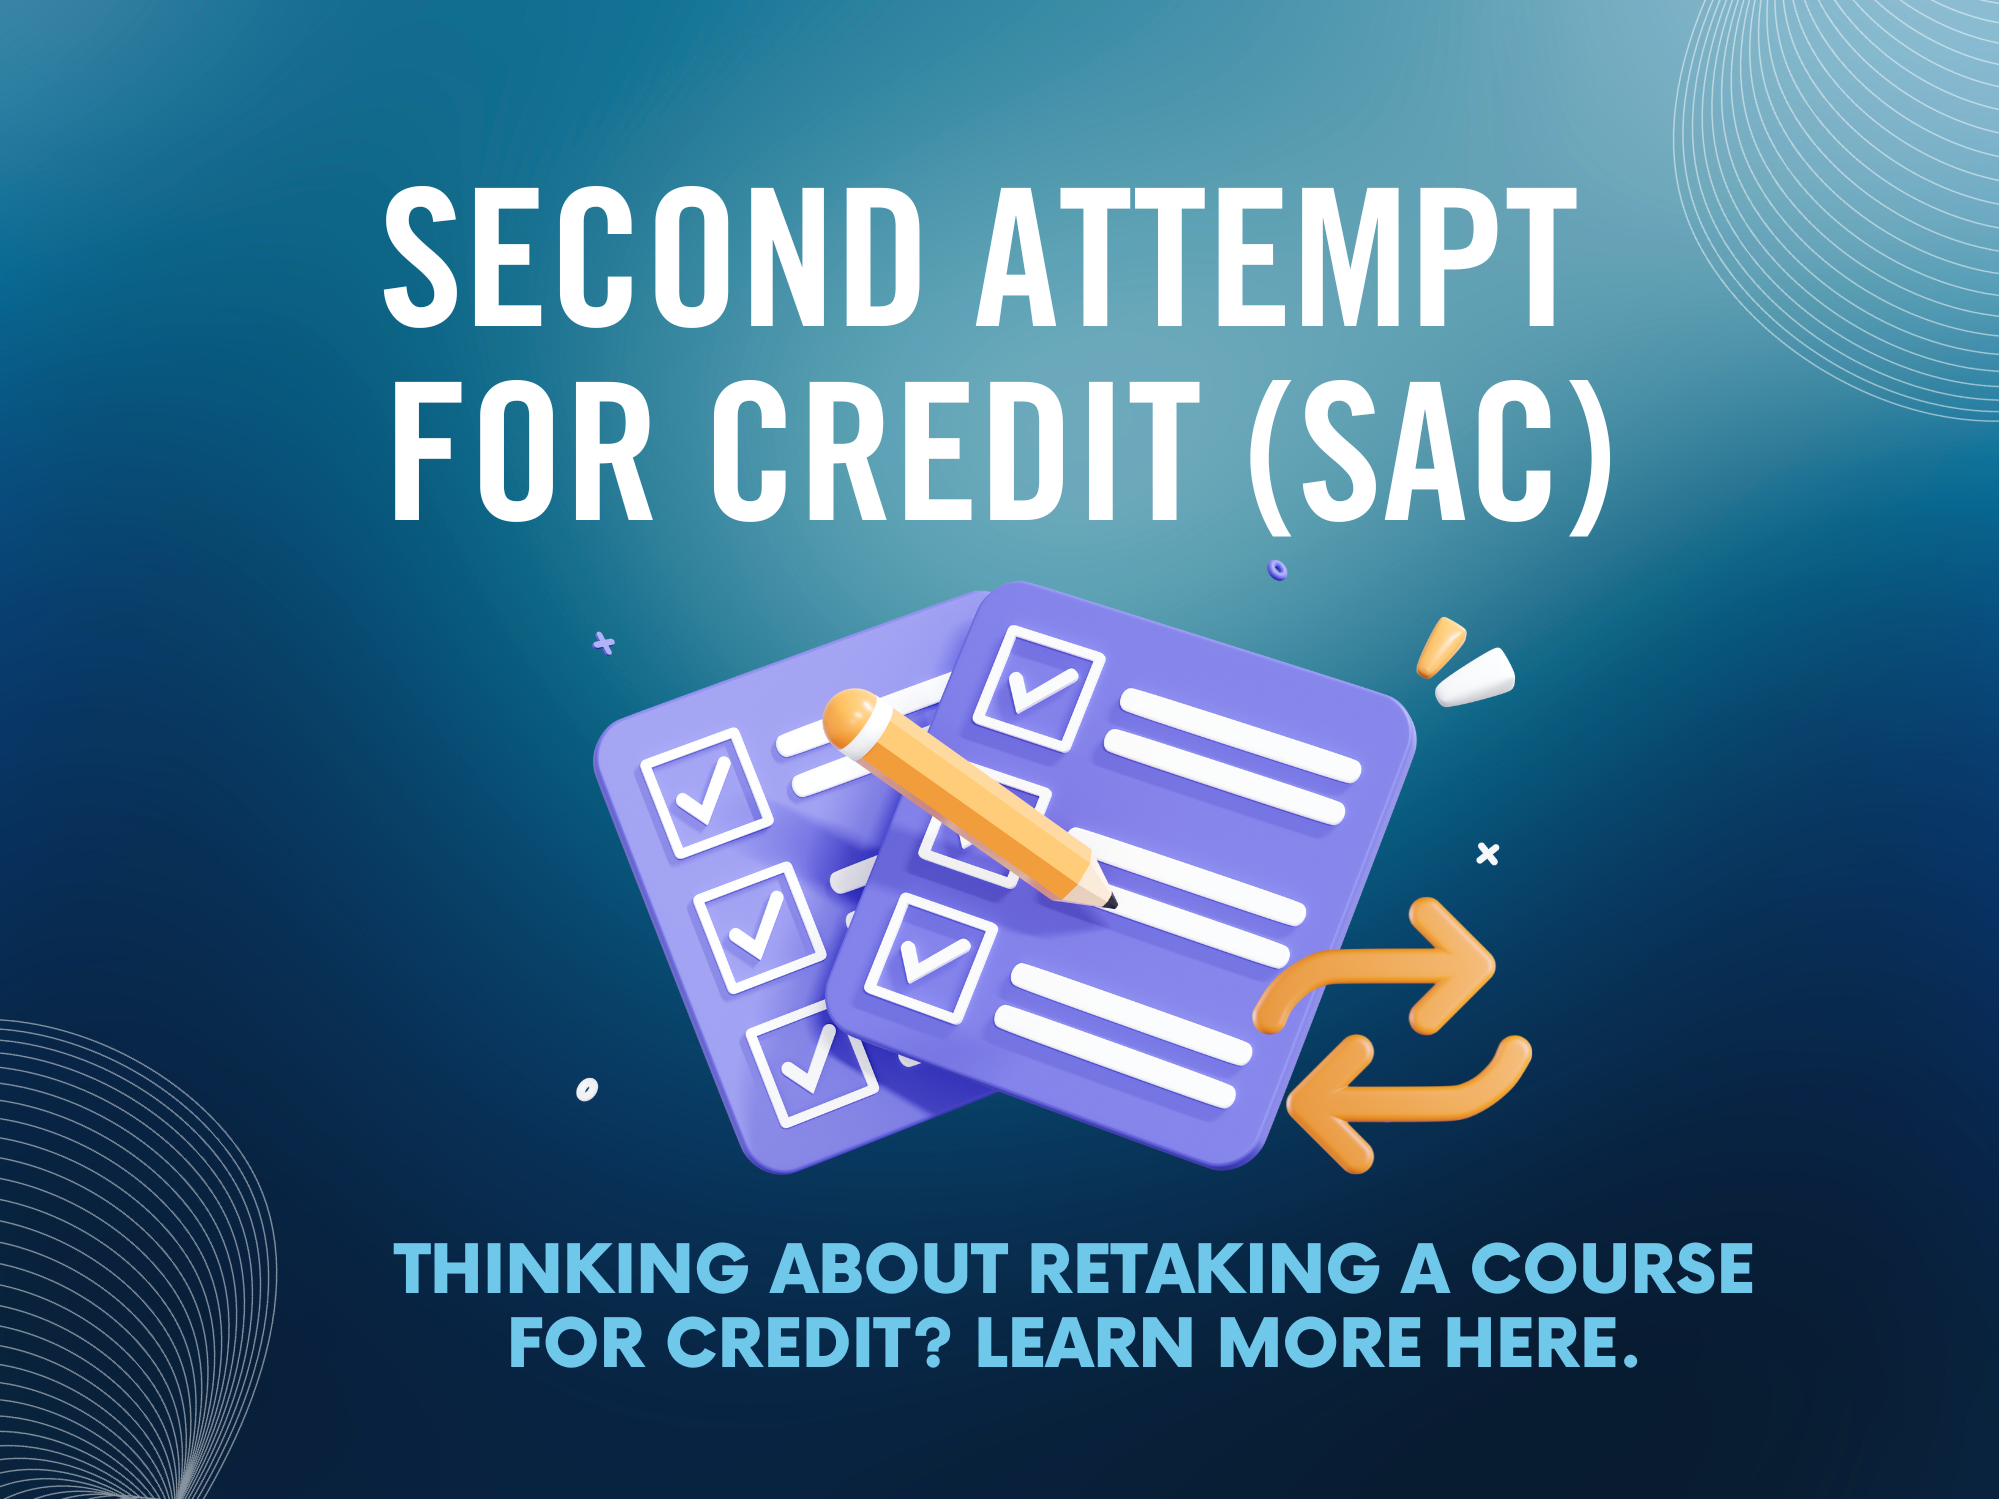 Second Attempt for Credit (SAC)